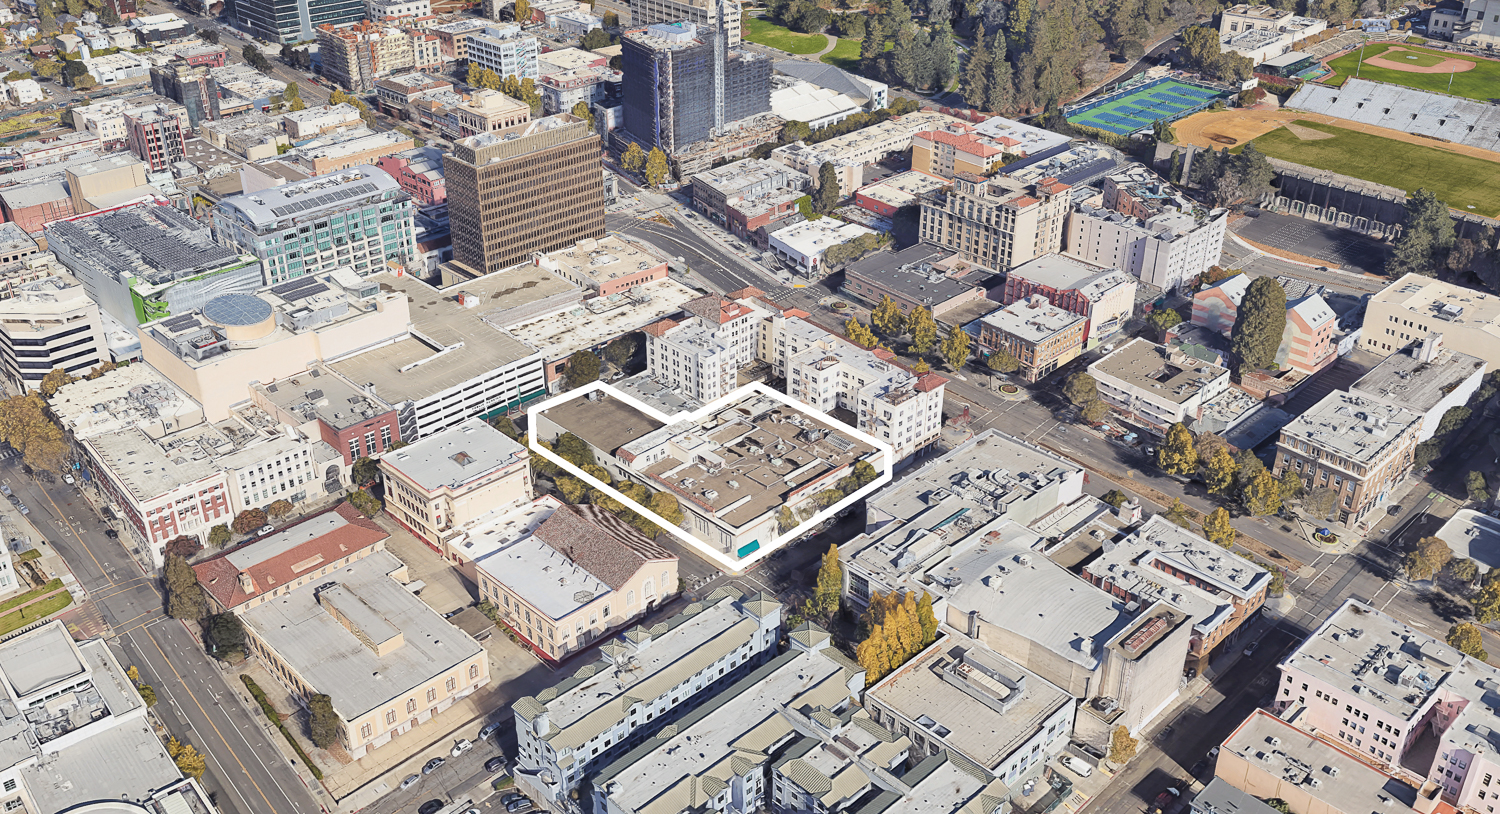 2065 Kittredge Street outlined by SF YIMBY, image via Google Satellite